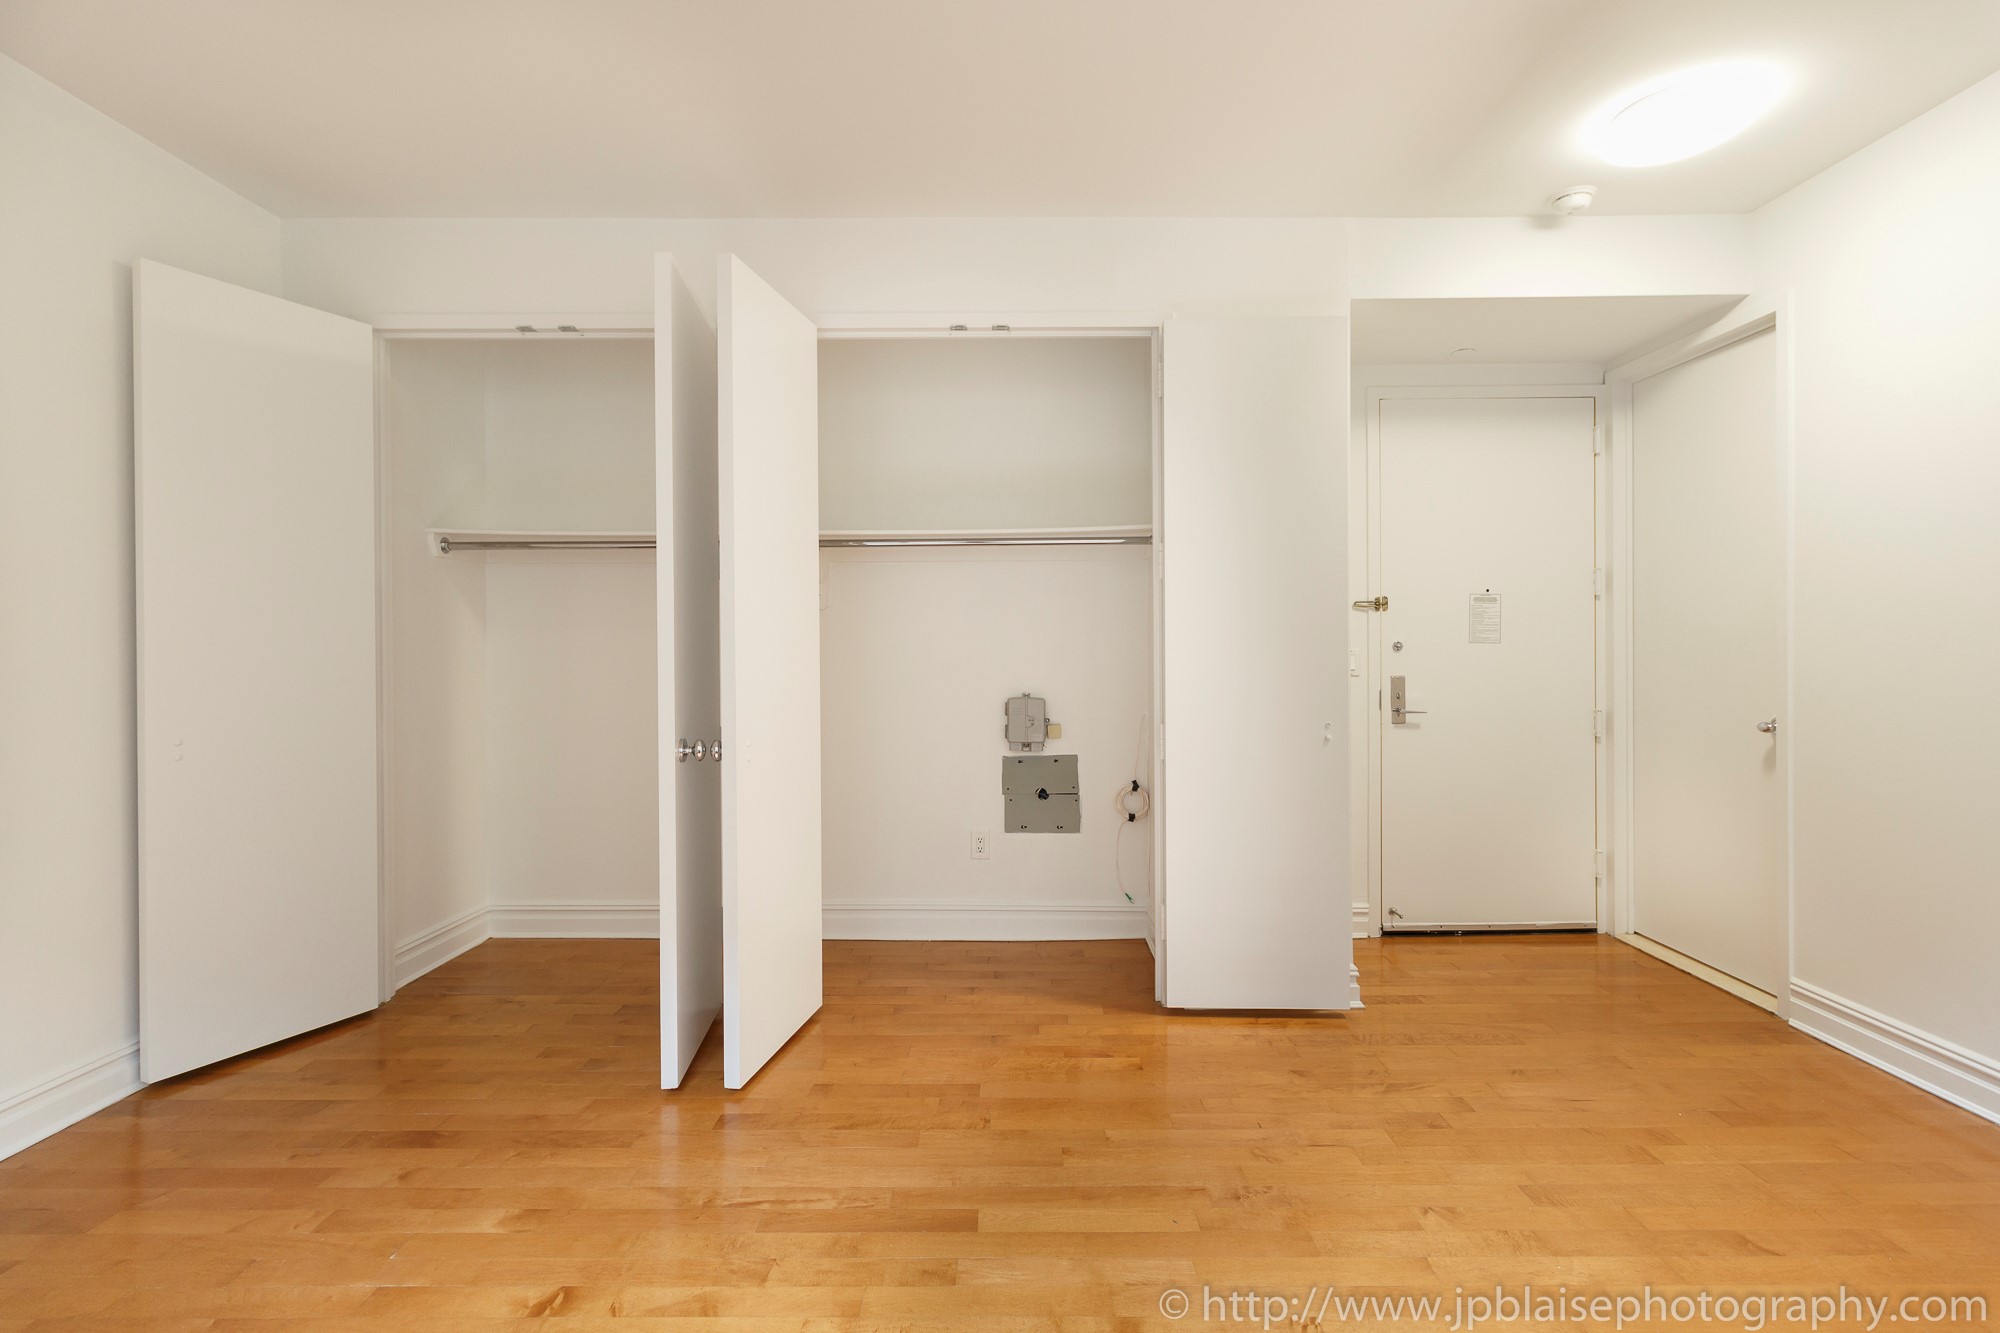 NY airbnb real estate interior apartment photographer upper east side manhattan ny new york Living room closets